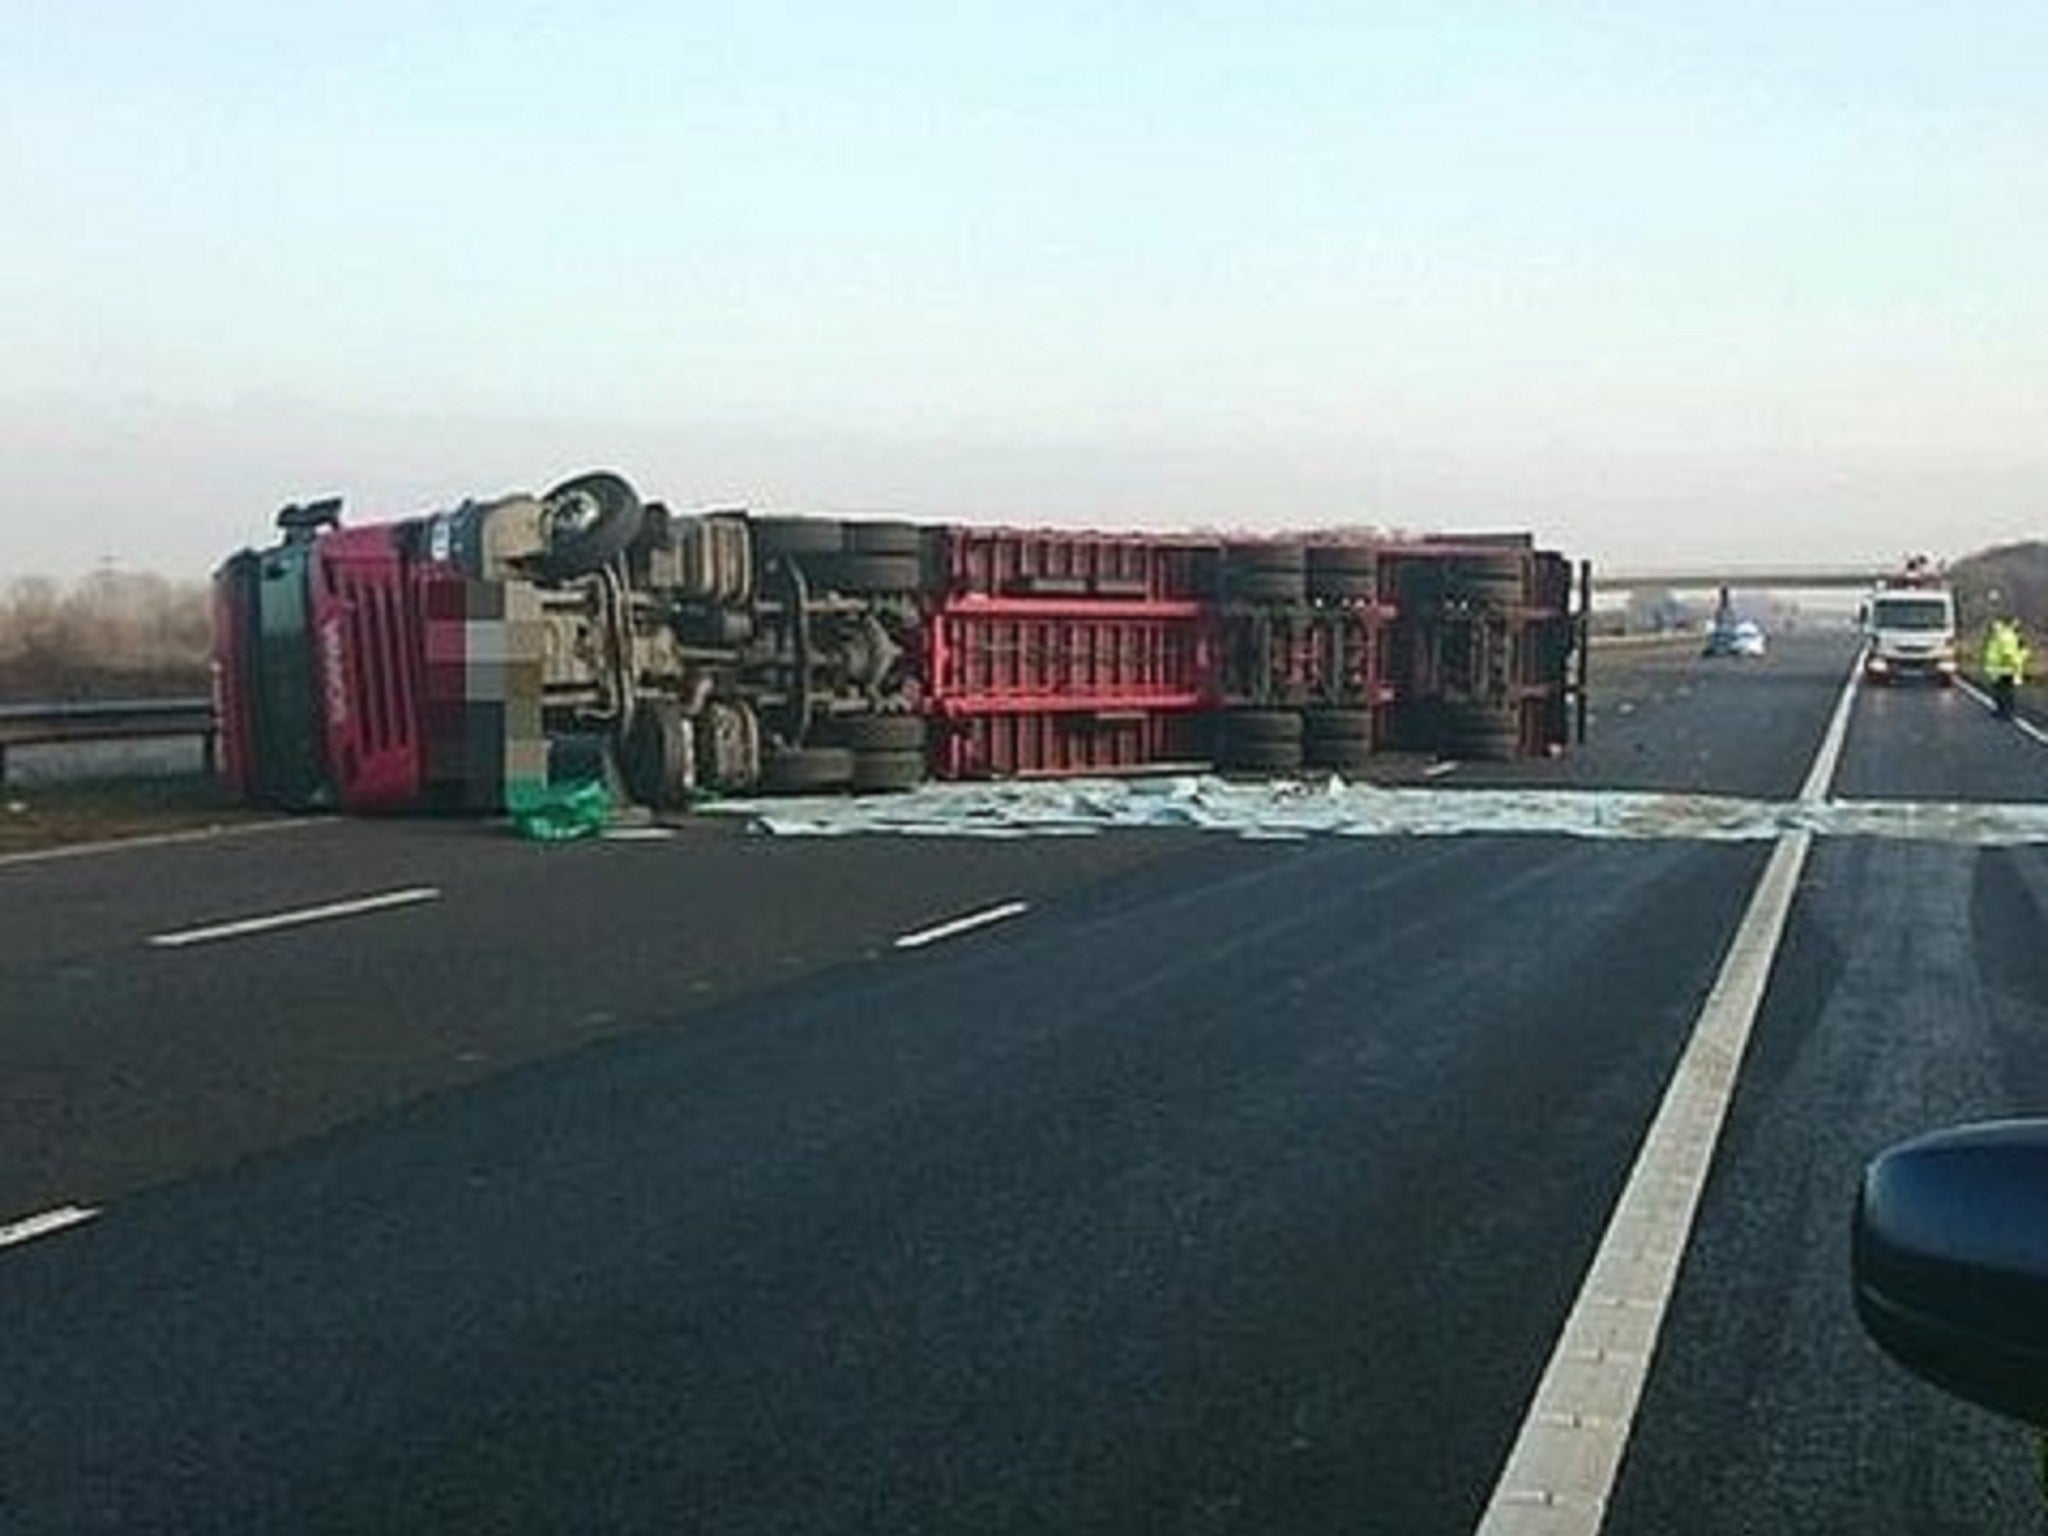 The HGV overturned and covered the road with diesel fuel